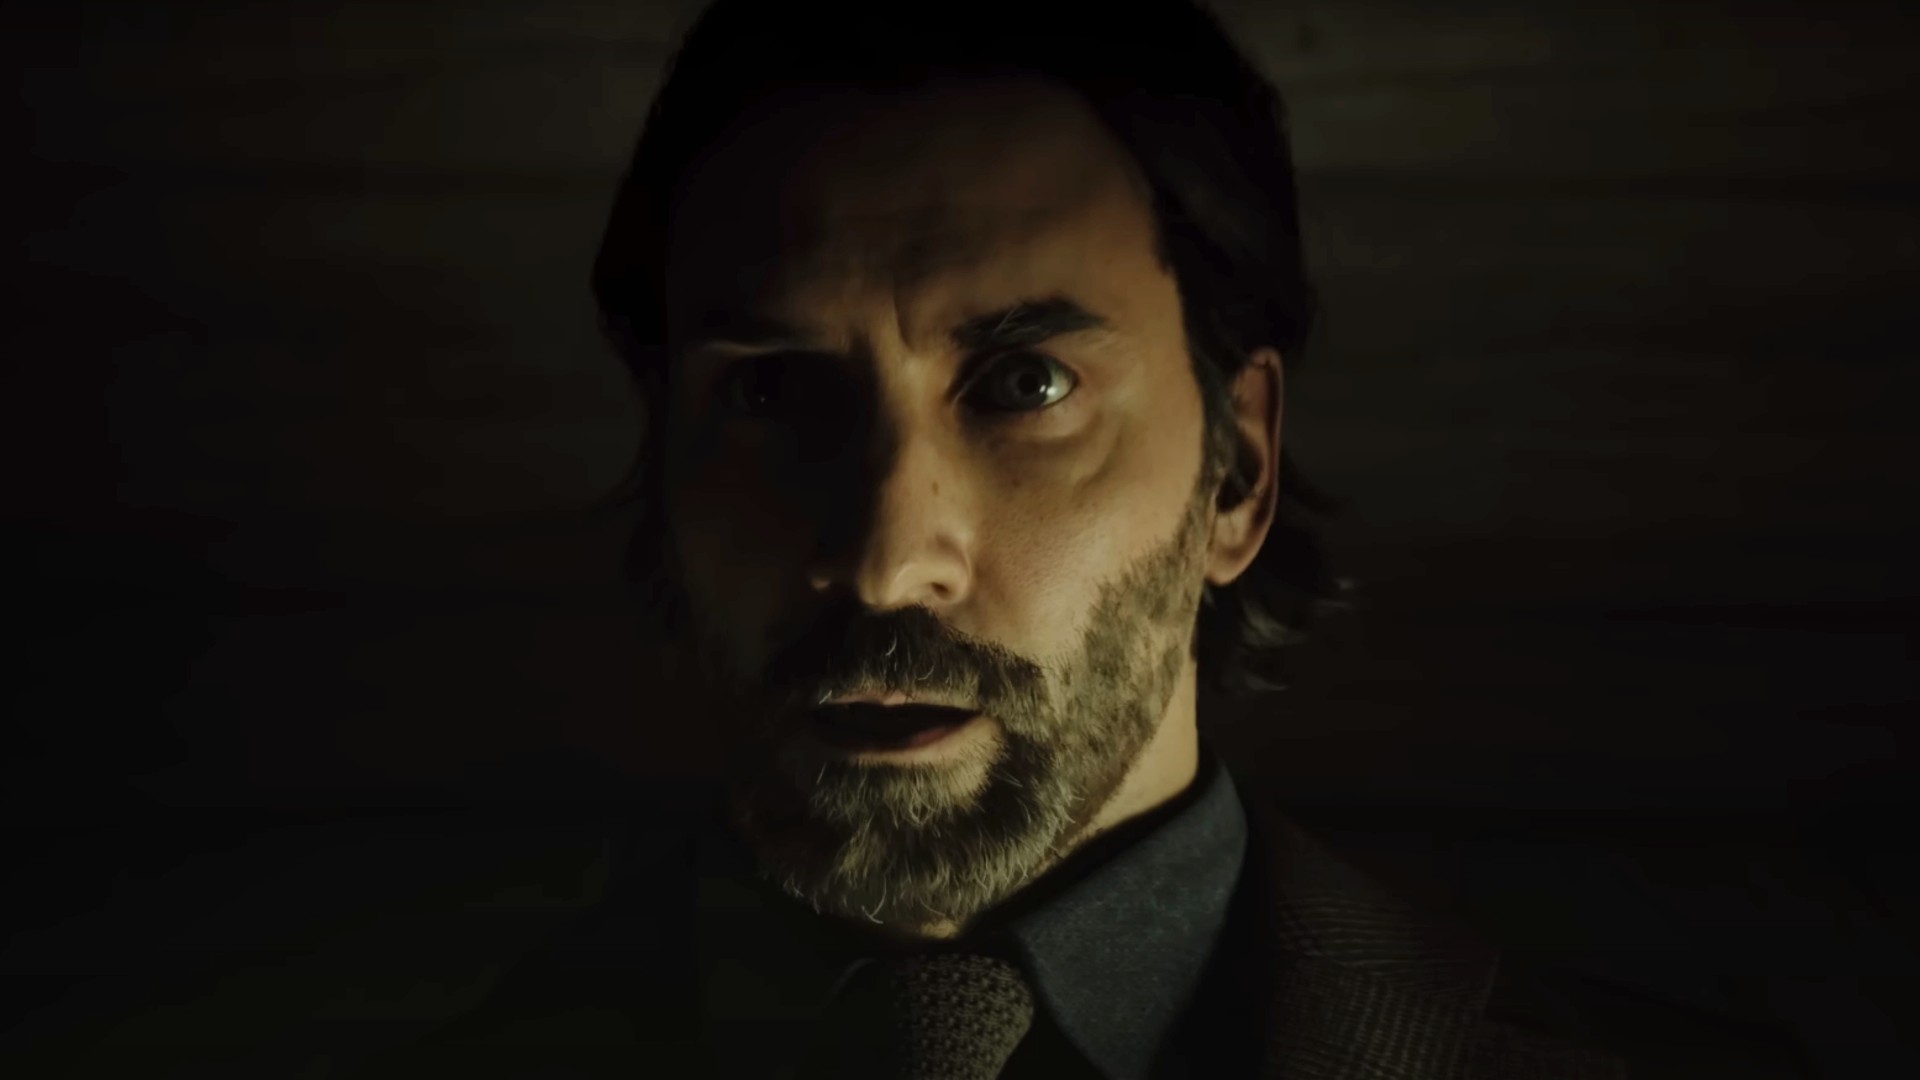 The Alan Wake Live-Action Prequel Series You Probably Never Watched